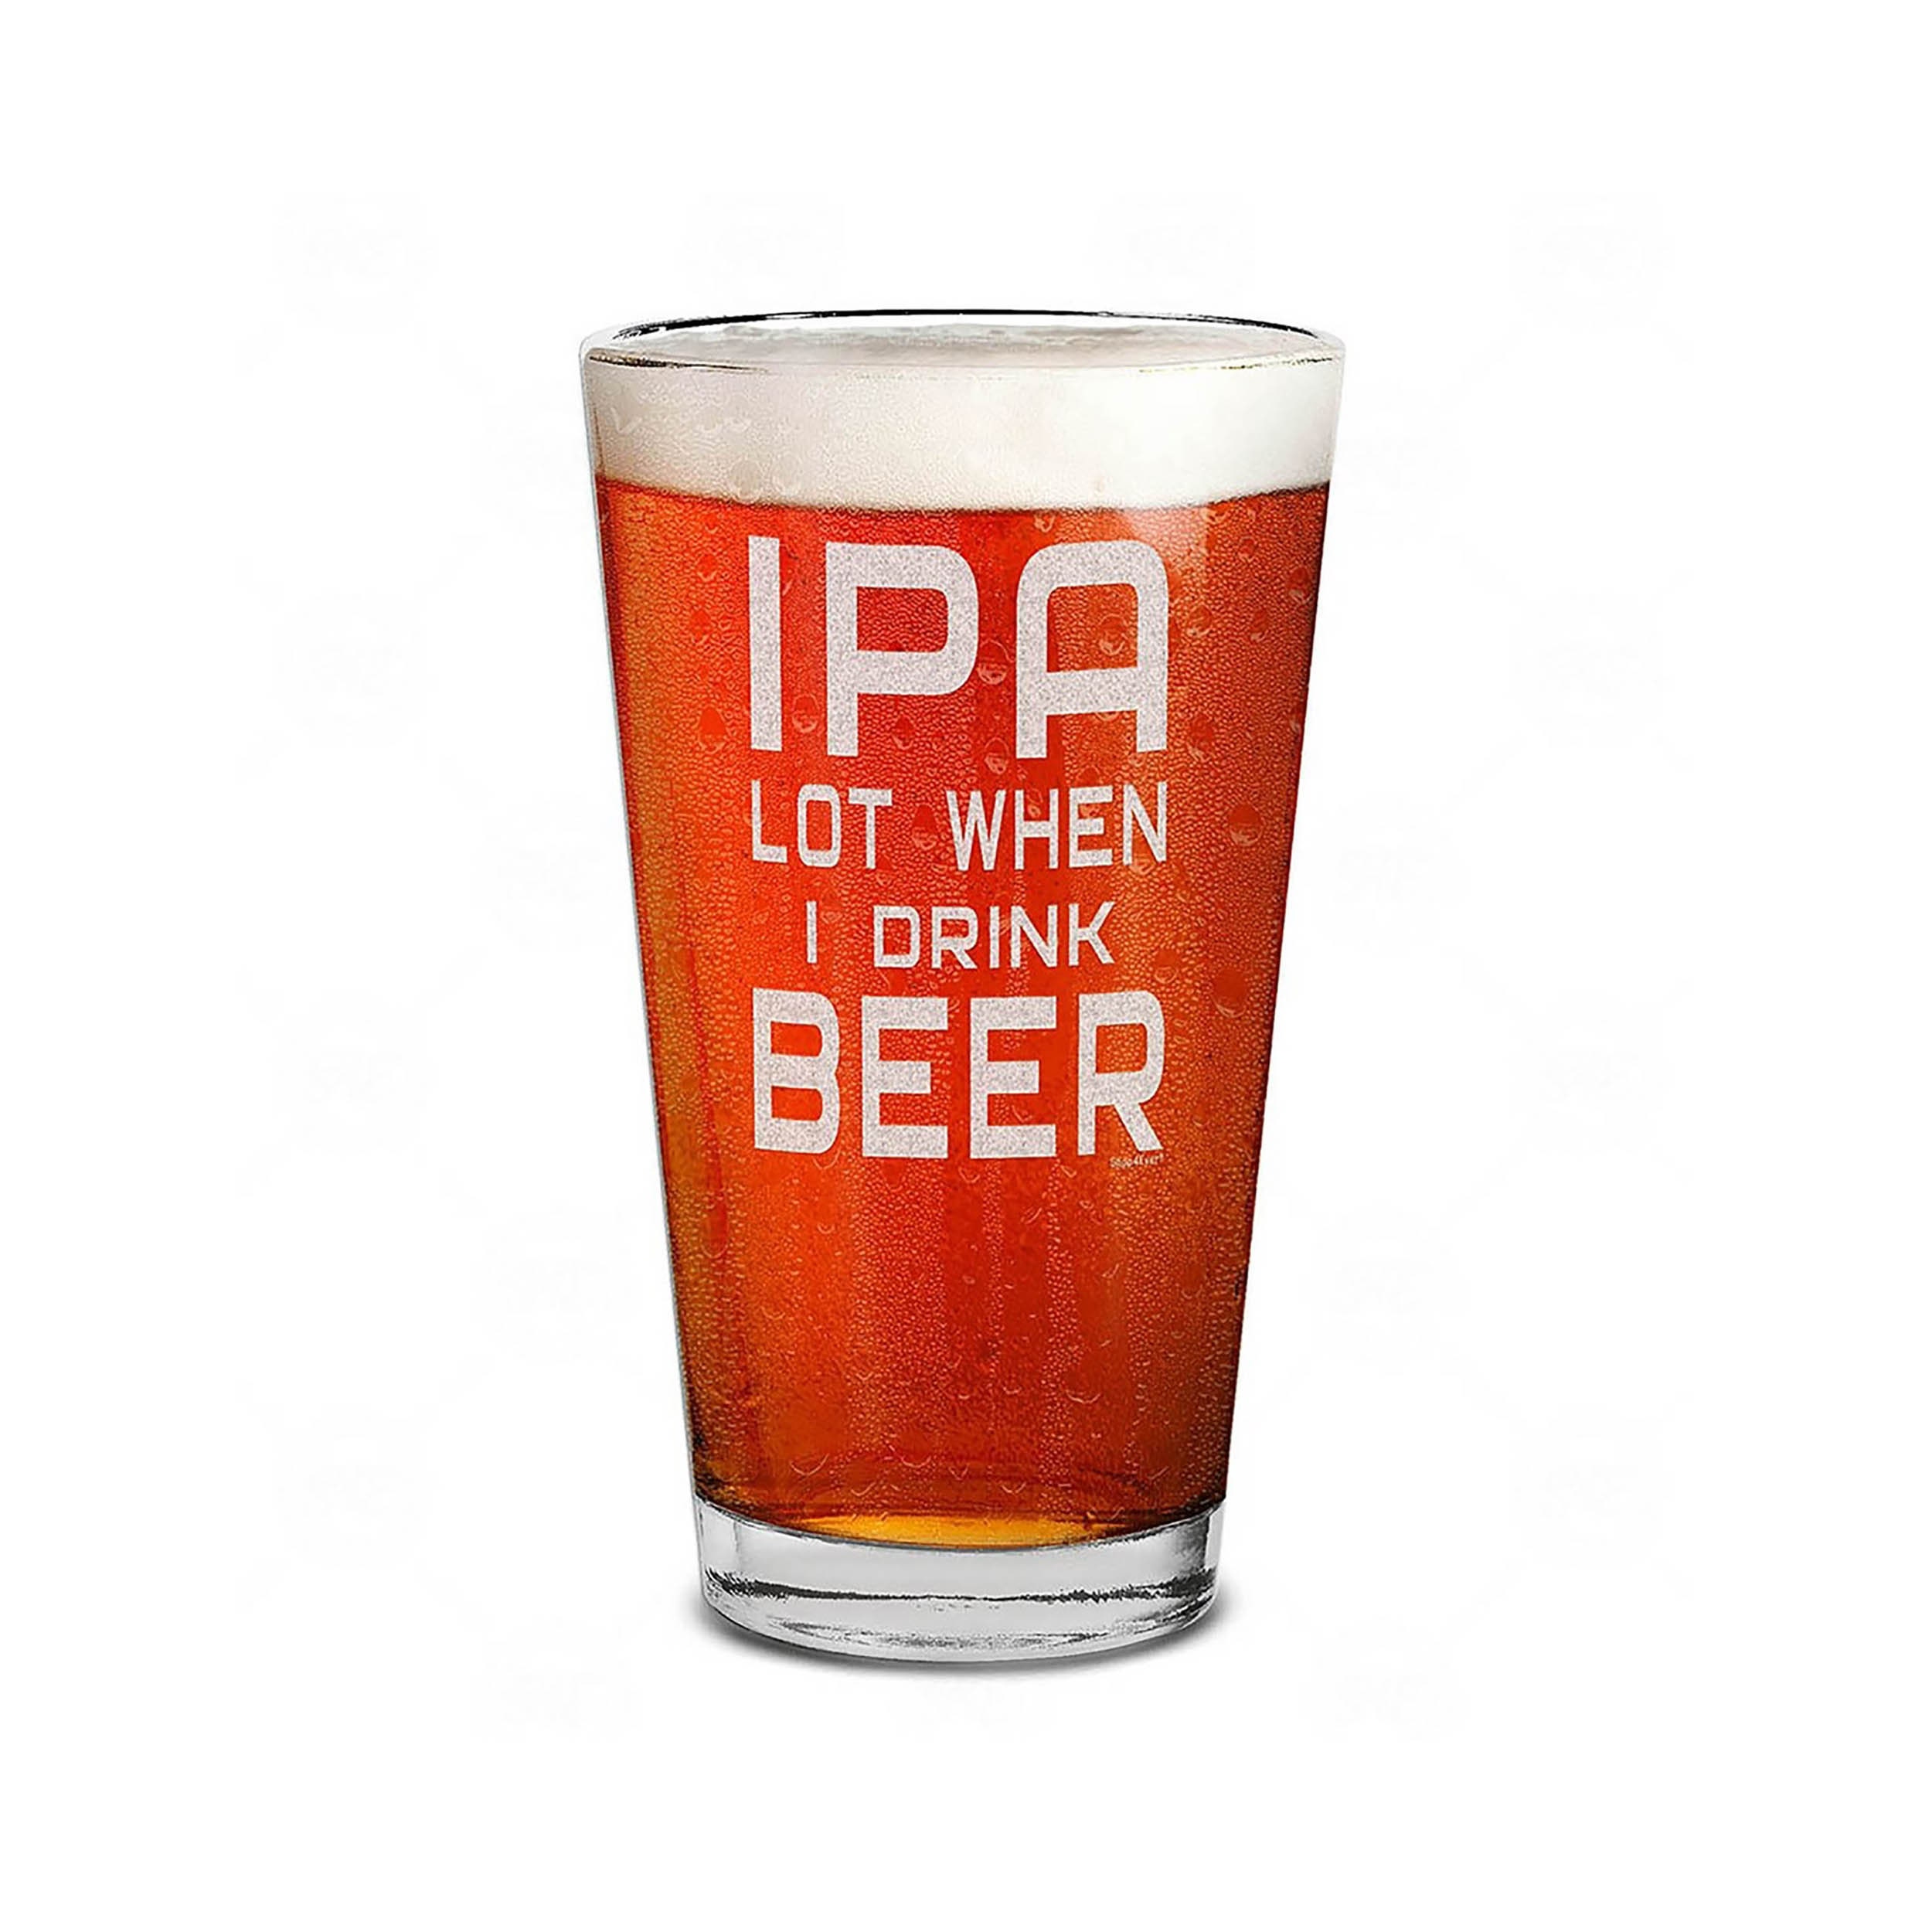 IPA Lot When I Drink Beer Pint Glass -  Denmark